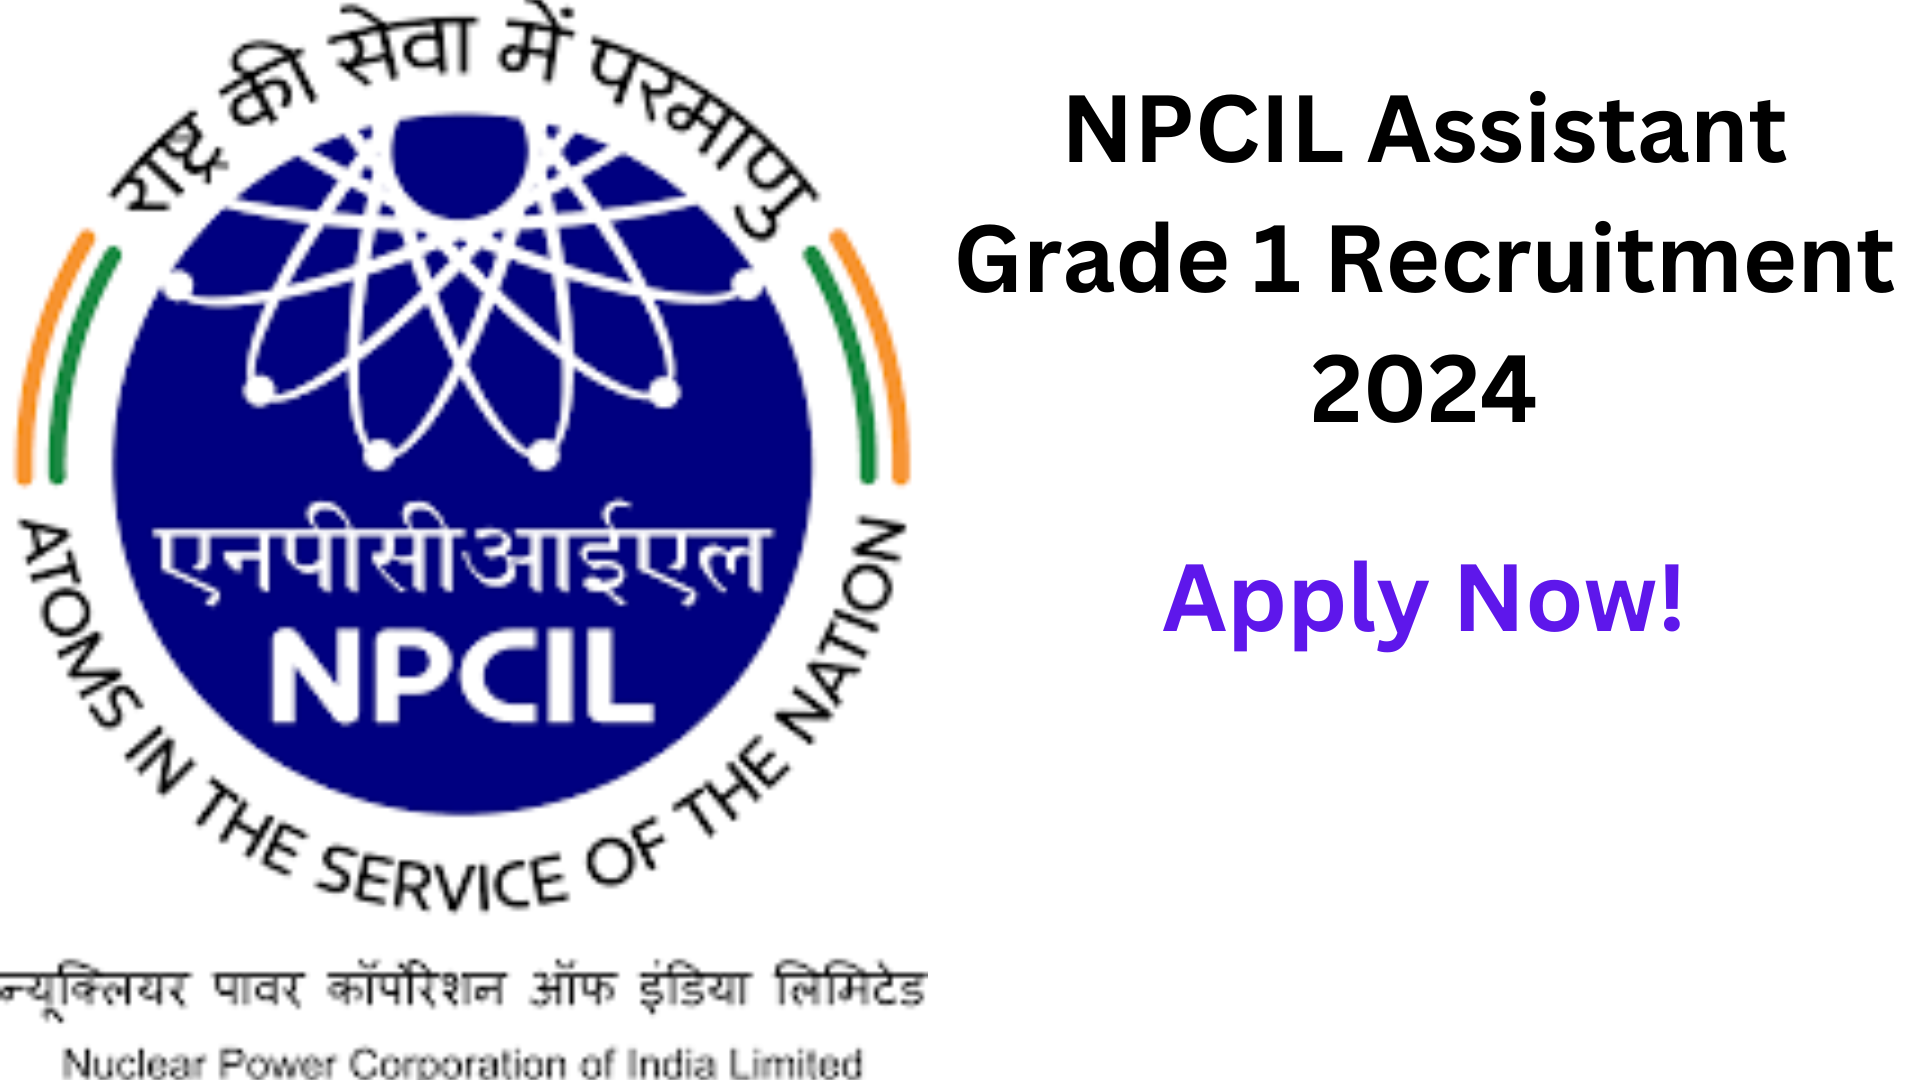 NPCIL Assistant Grade 1 Recruitment 2024, Apply Now, Salary Up To 25,500, Eligibility Criteria, and More